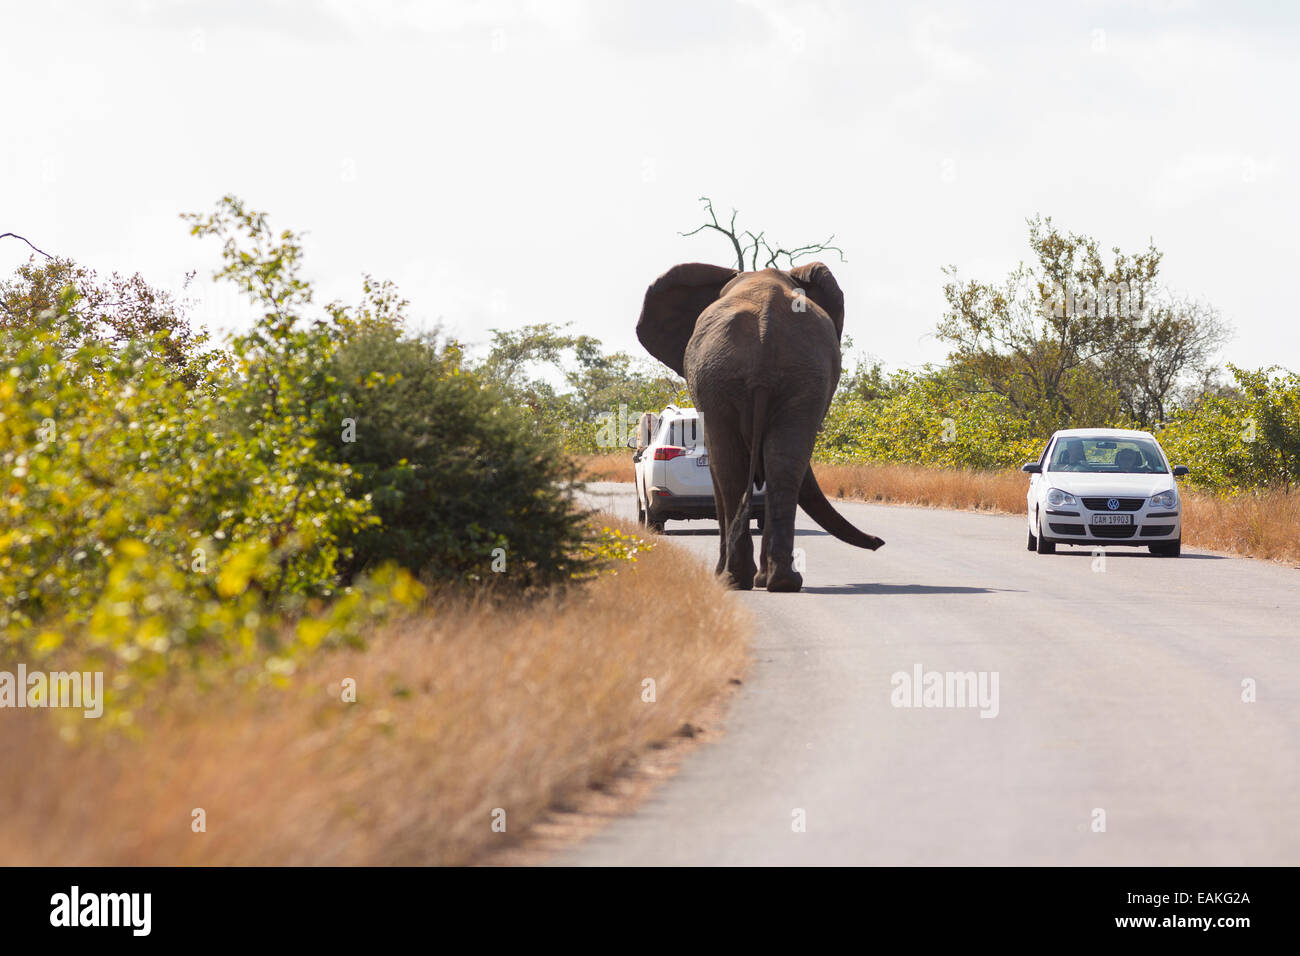 KRUGER NATIONAL PARK, SOUTH AFRICA - Elephant on road with two cars. Stock Photo